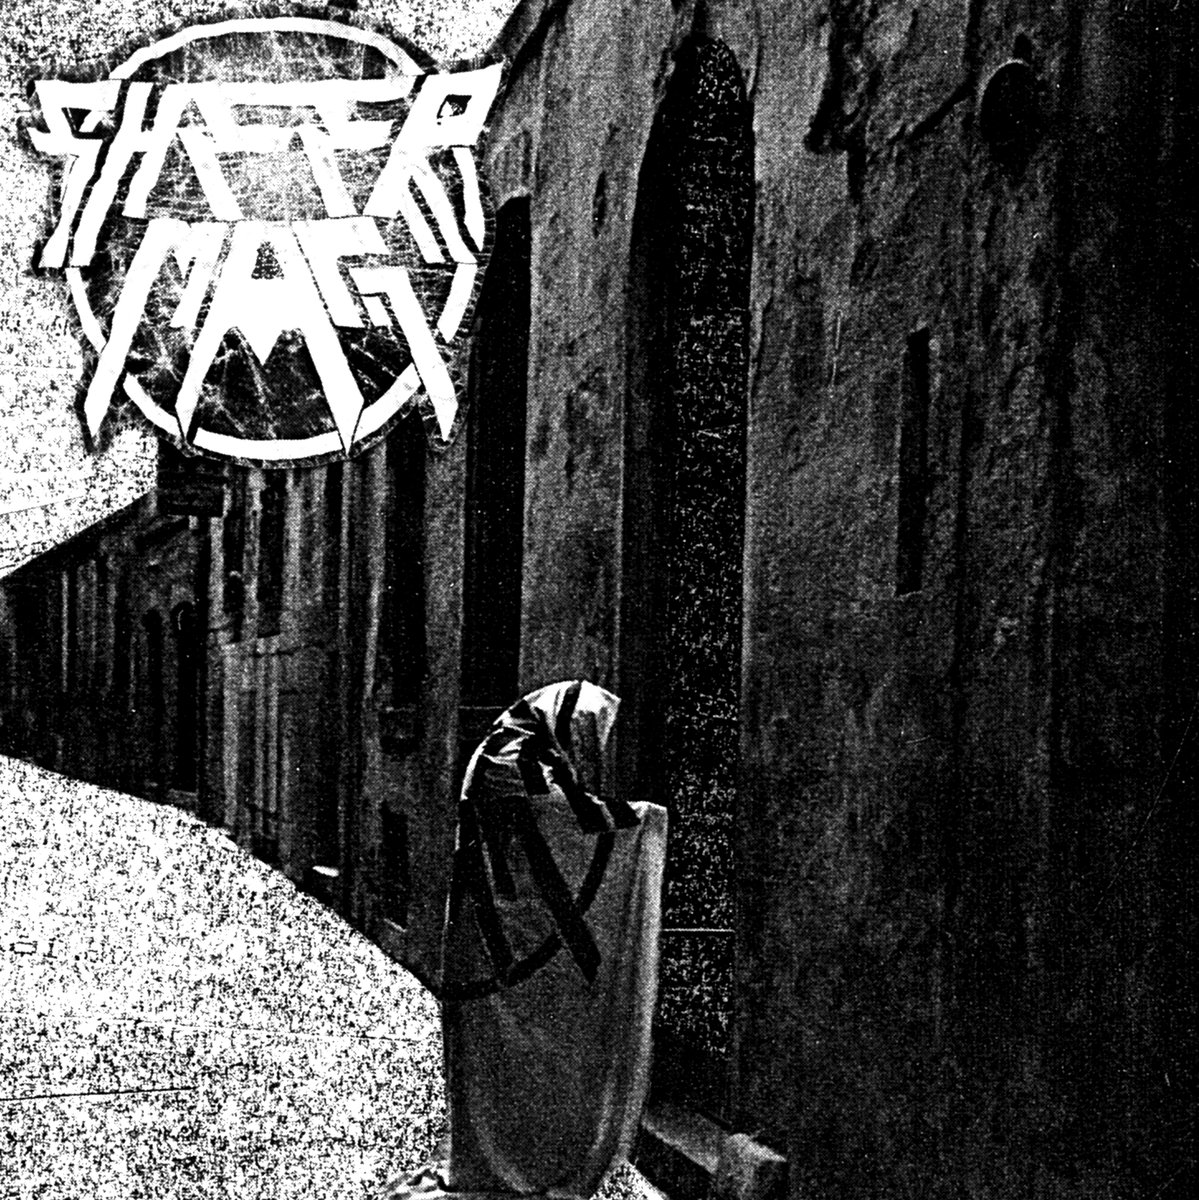 'III' by Sheer Mag, album review